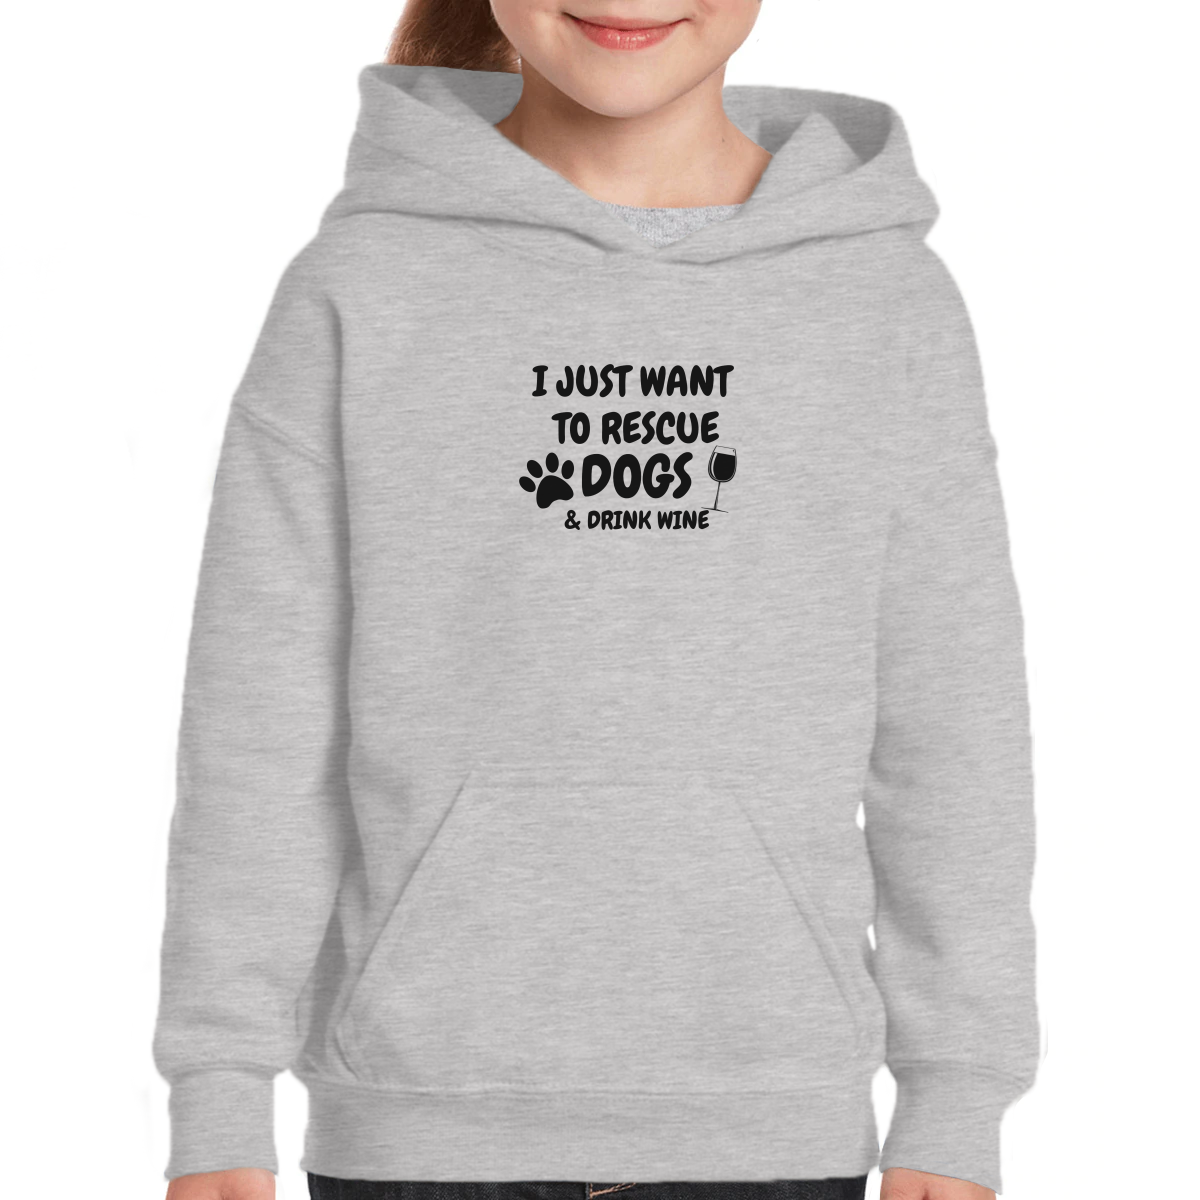 Dogs and Drink Wine Kids Hoodie | Gray